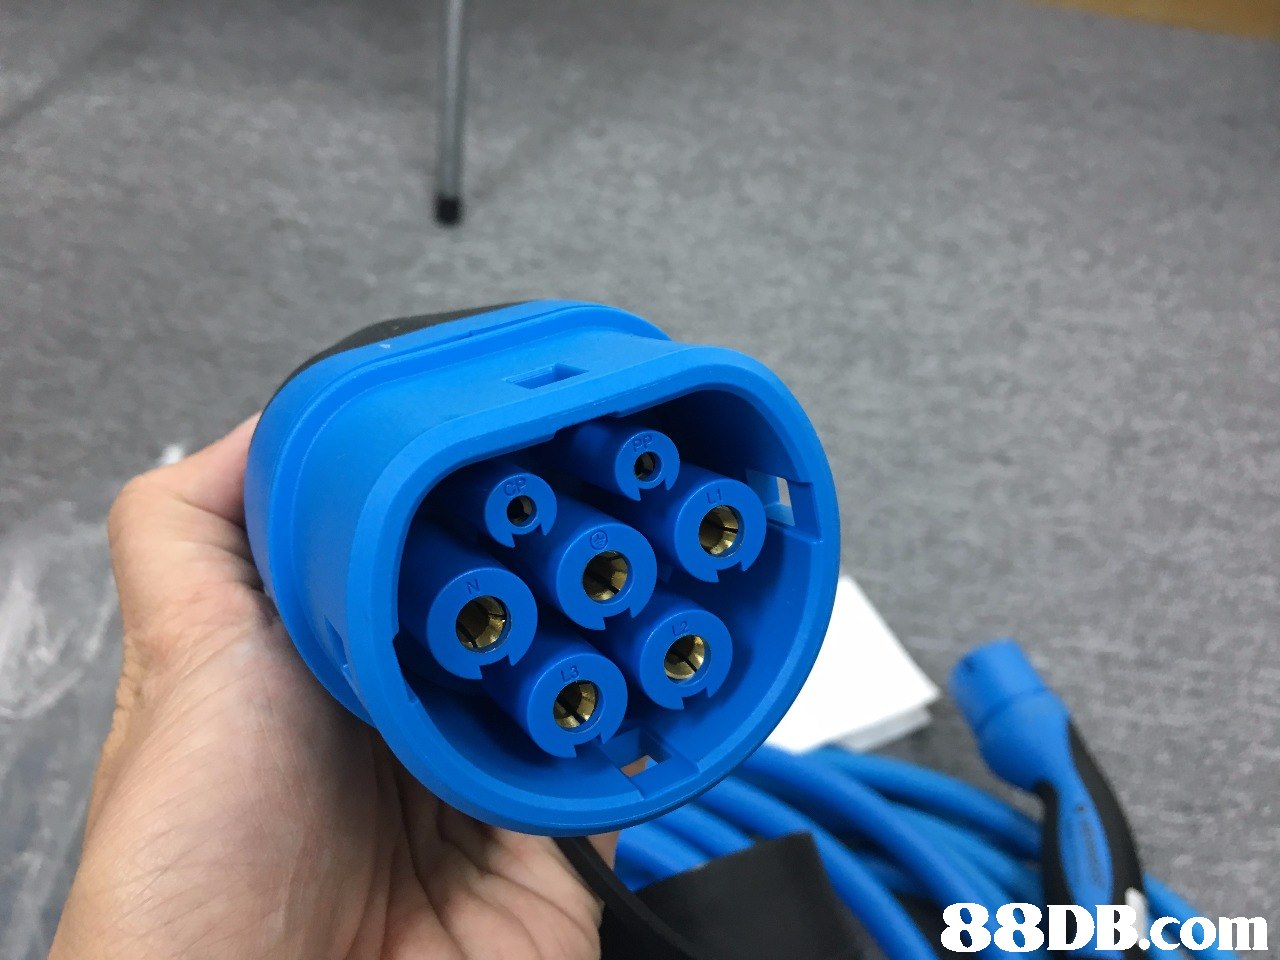   Electrical connector,Cable,Electronic device,Technology,Electric blue